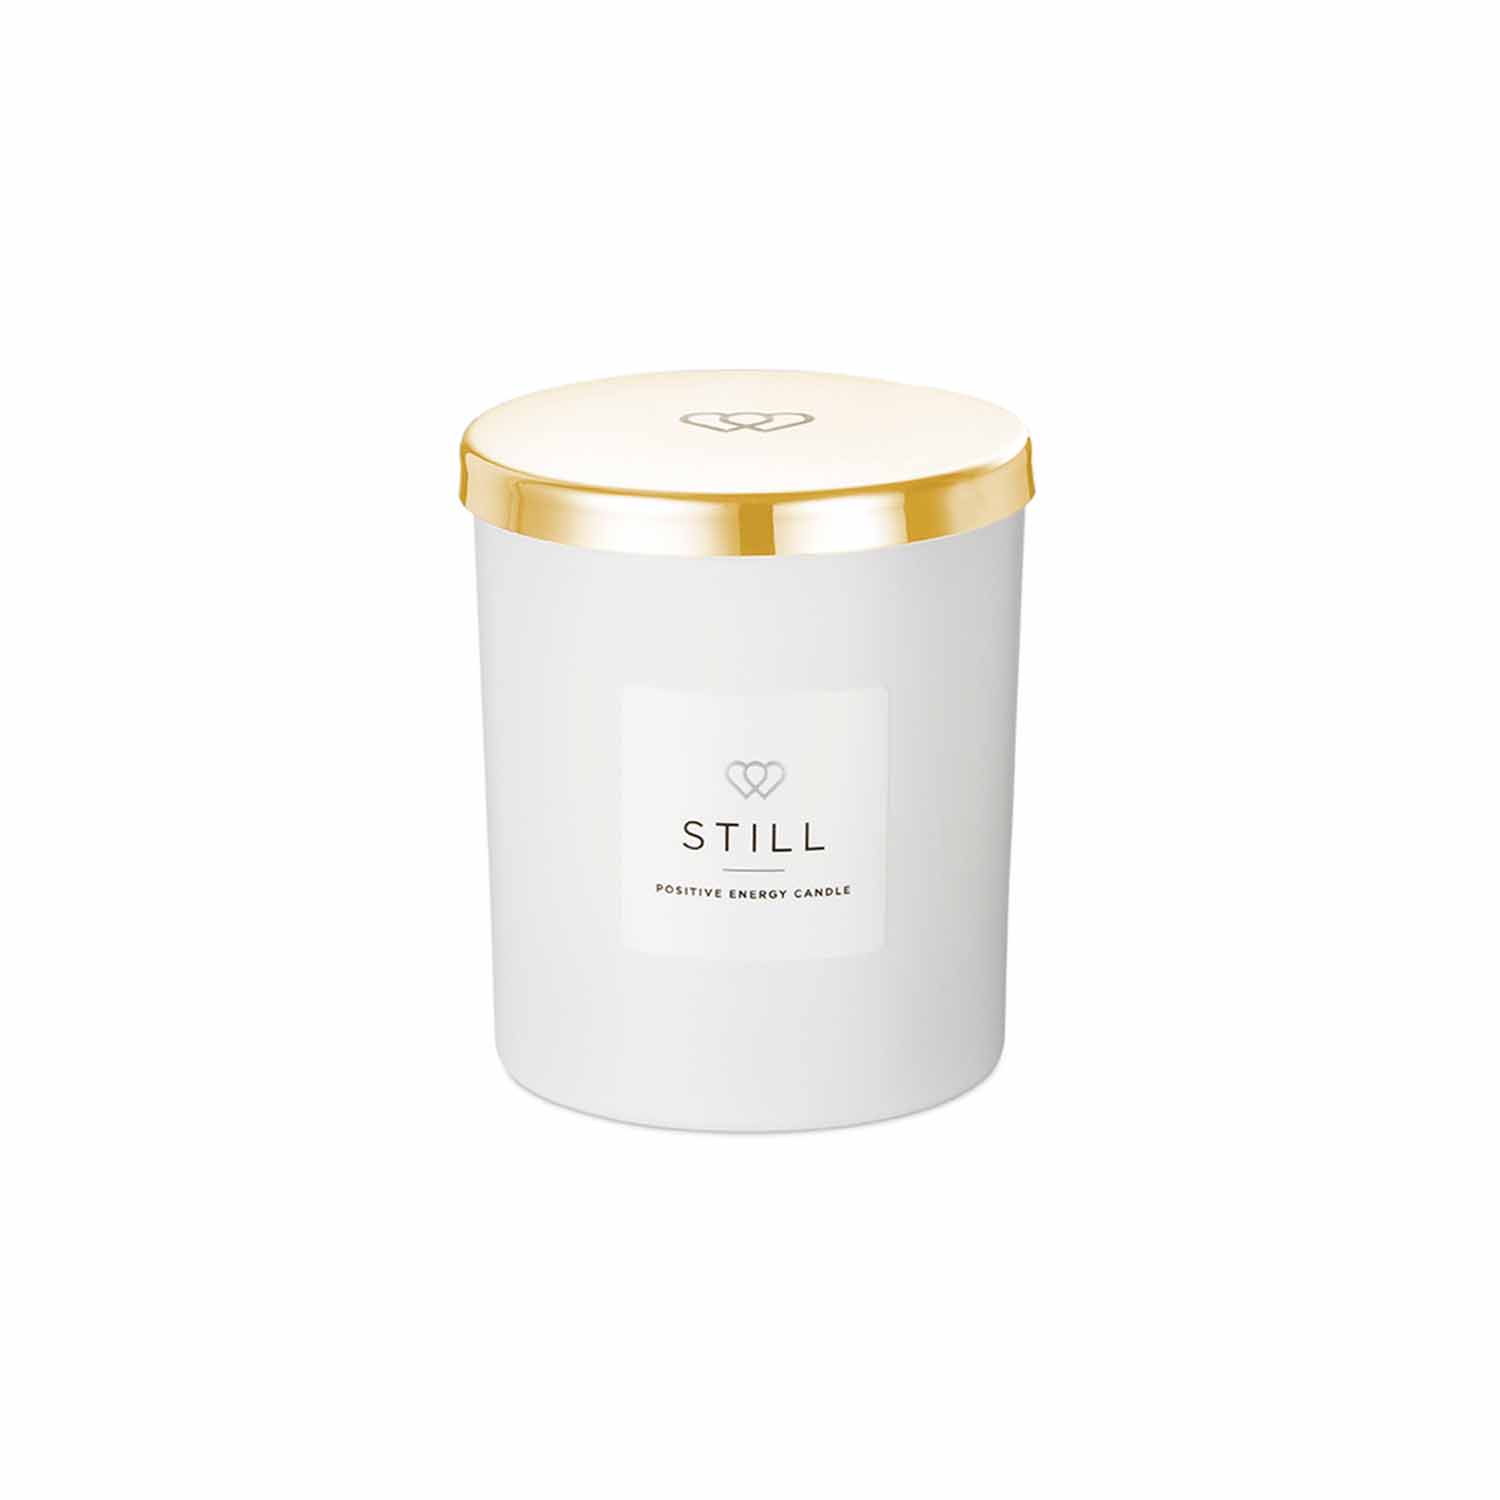 Positive energy Candle Still 30cl snow white with gold lid - The Universal Soul Company